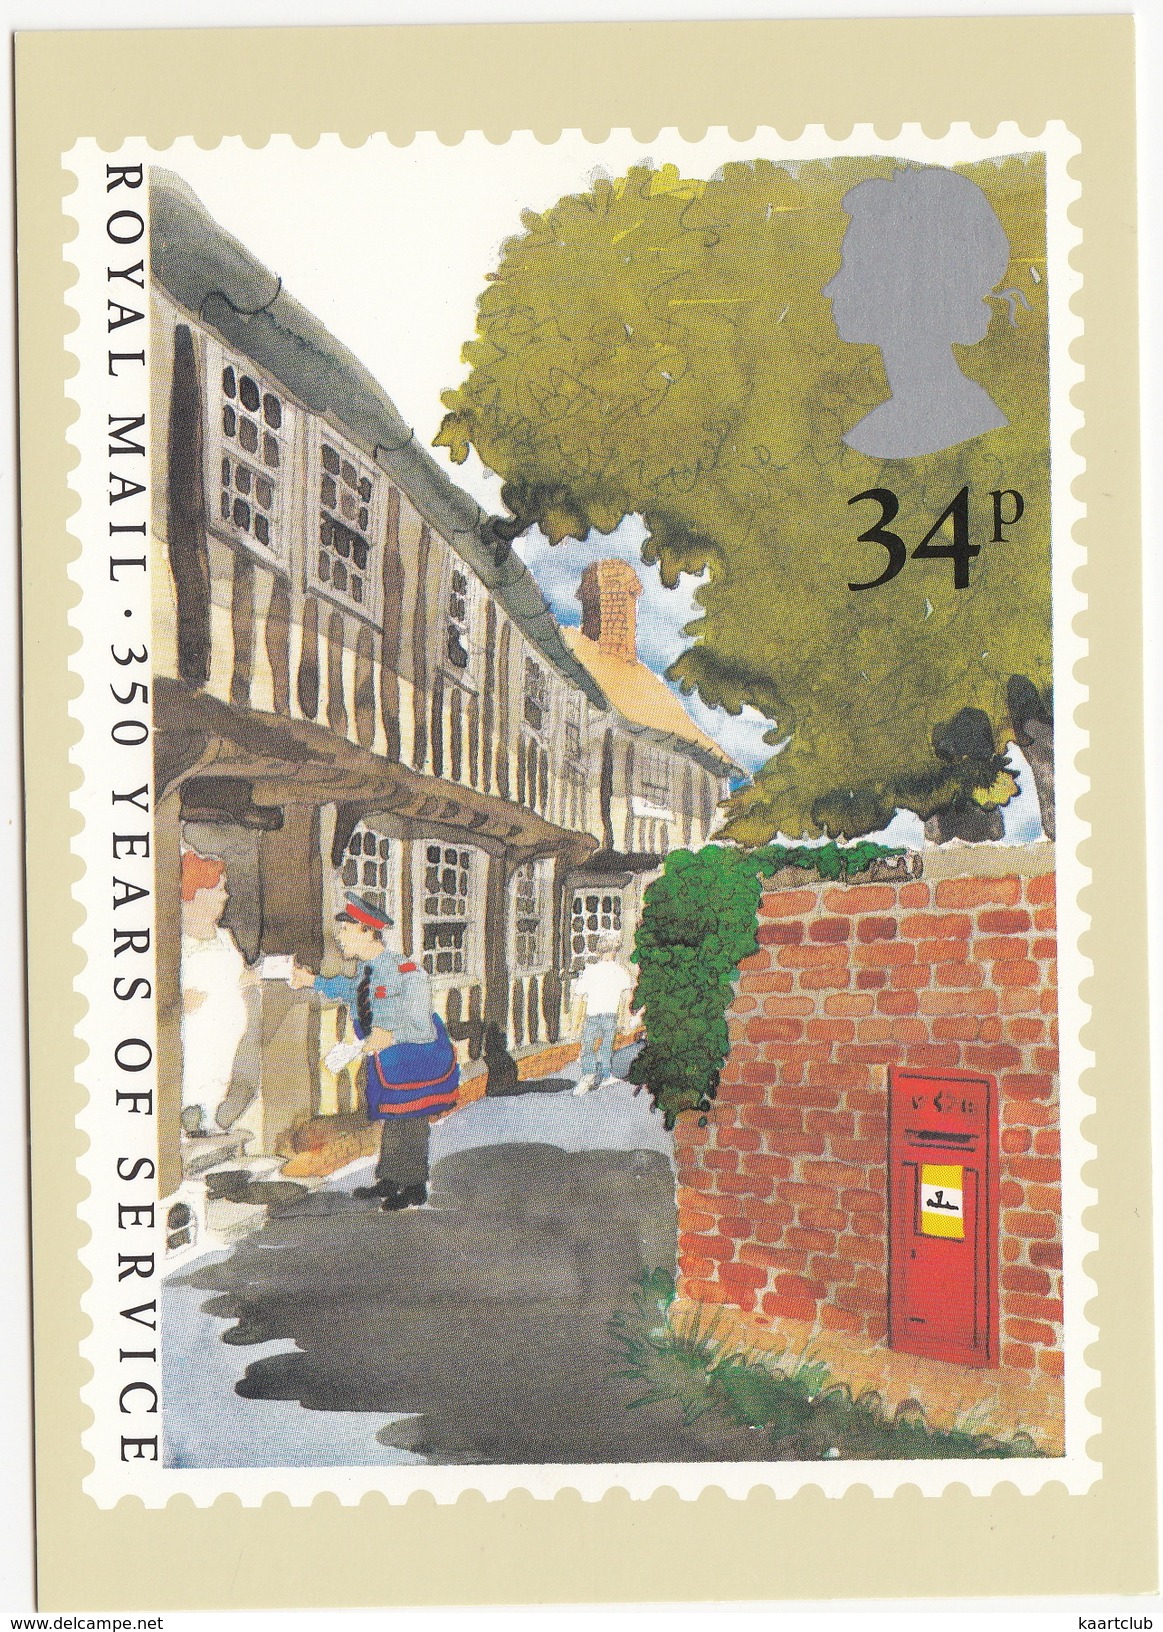 Royal Mail 350 Years Of Service - Letter Post, Mail Man &  Letterbox - (UK) - Post